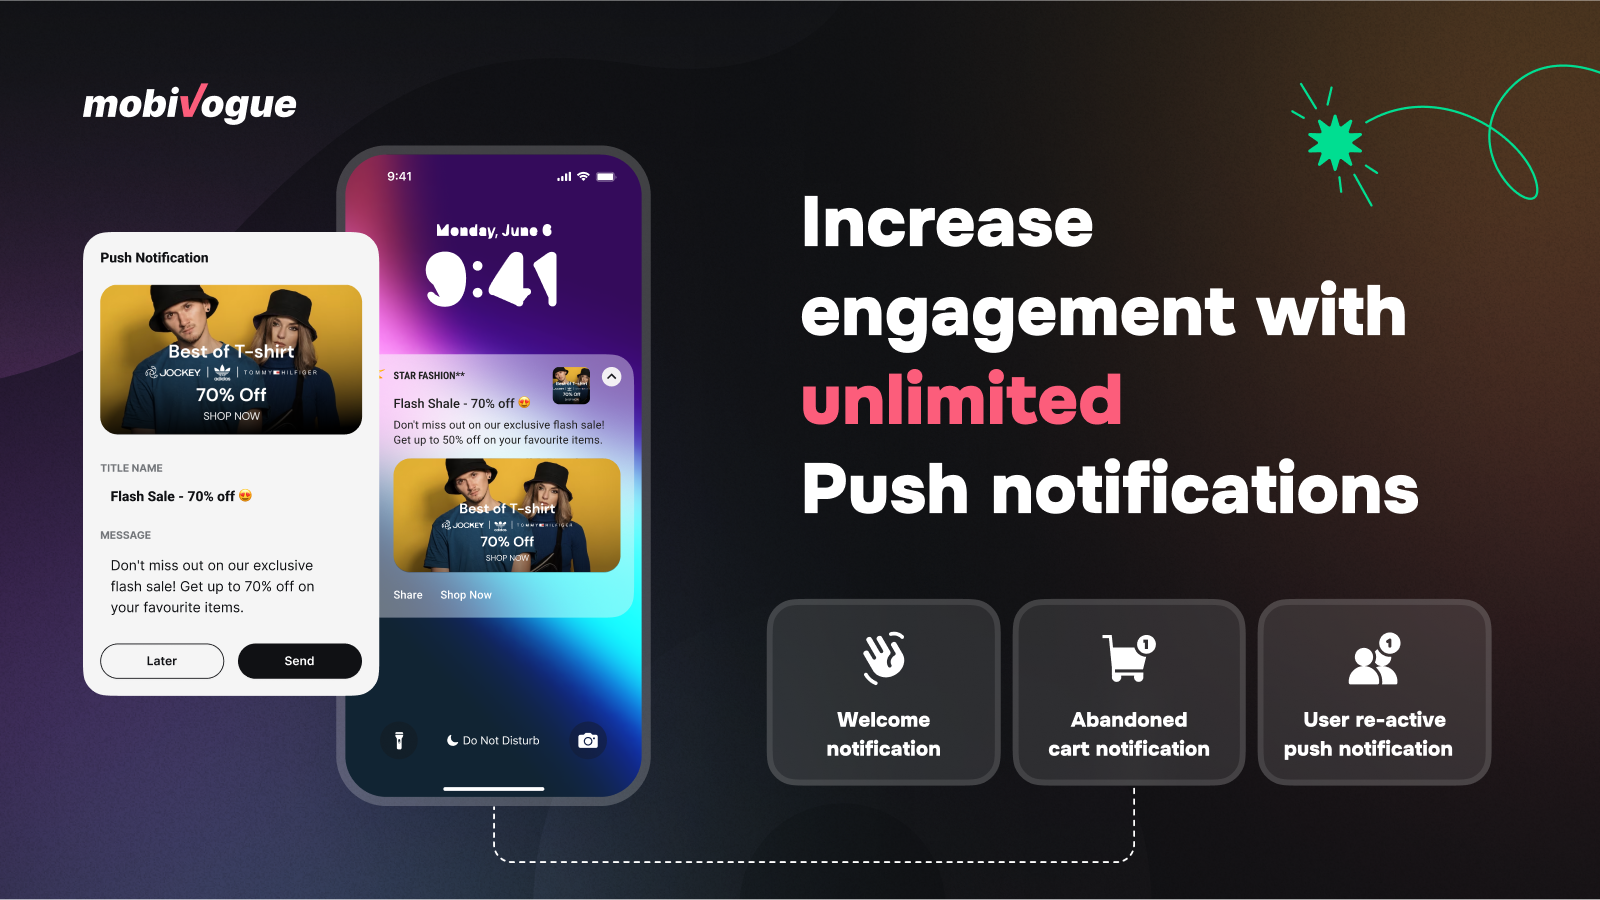 Increase engagement with unlimited push notifications